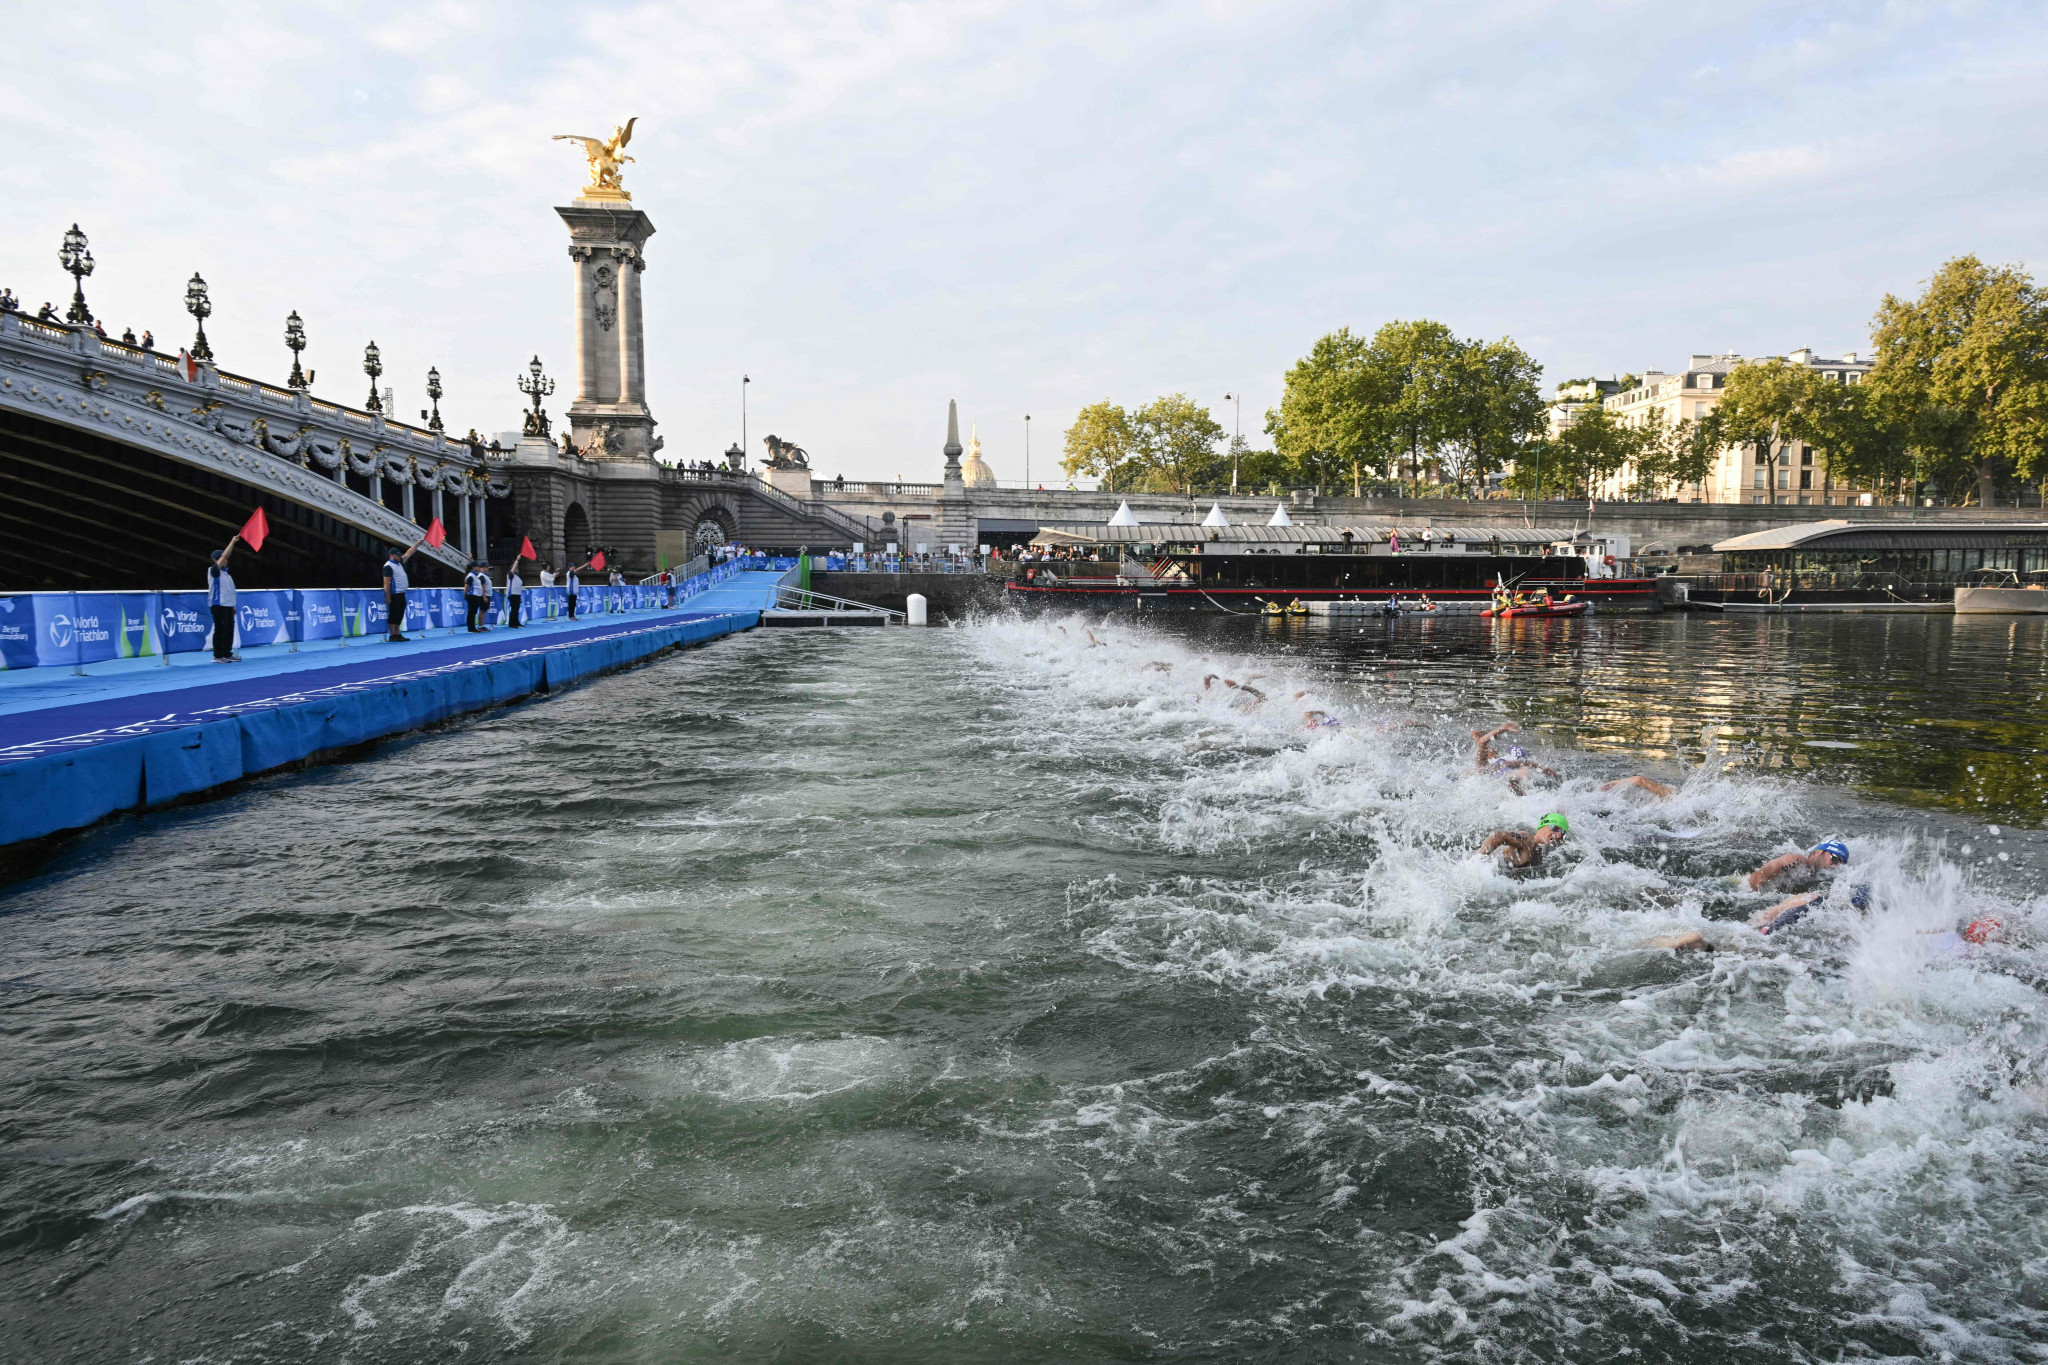 Men's and women's triathlon races took place in the Seine, but the river could not be used at other Paris 2024 test events last month ©Getty Images